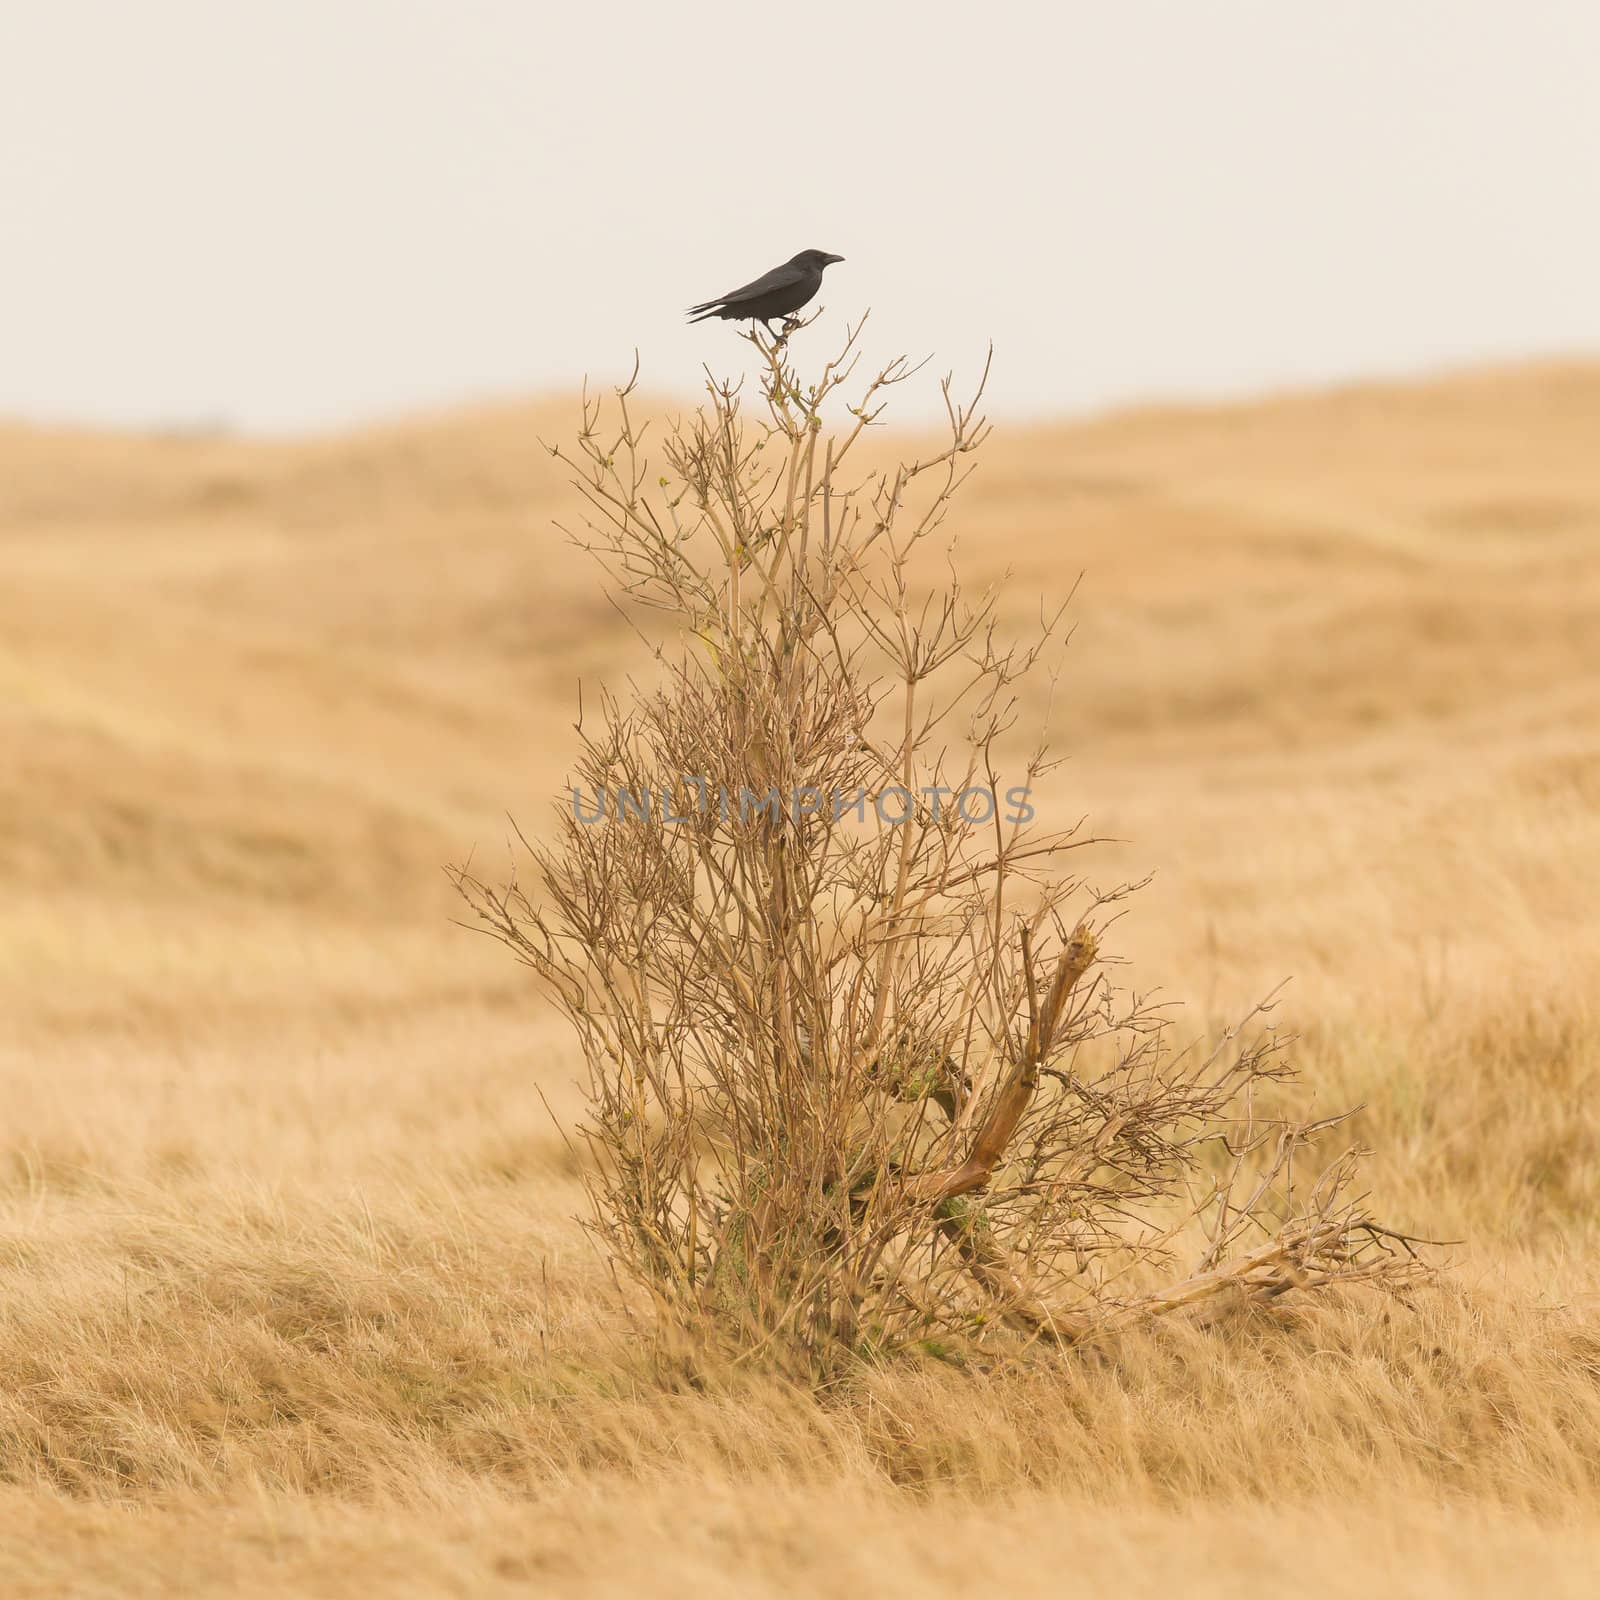 Single crow sitting on a small tree